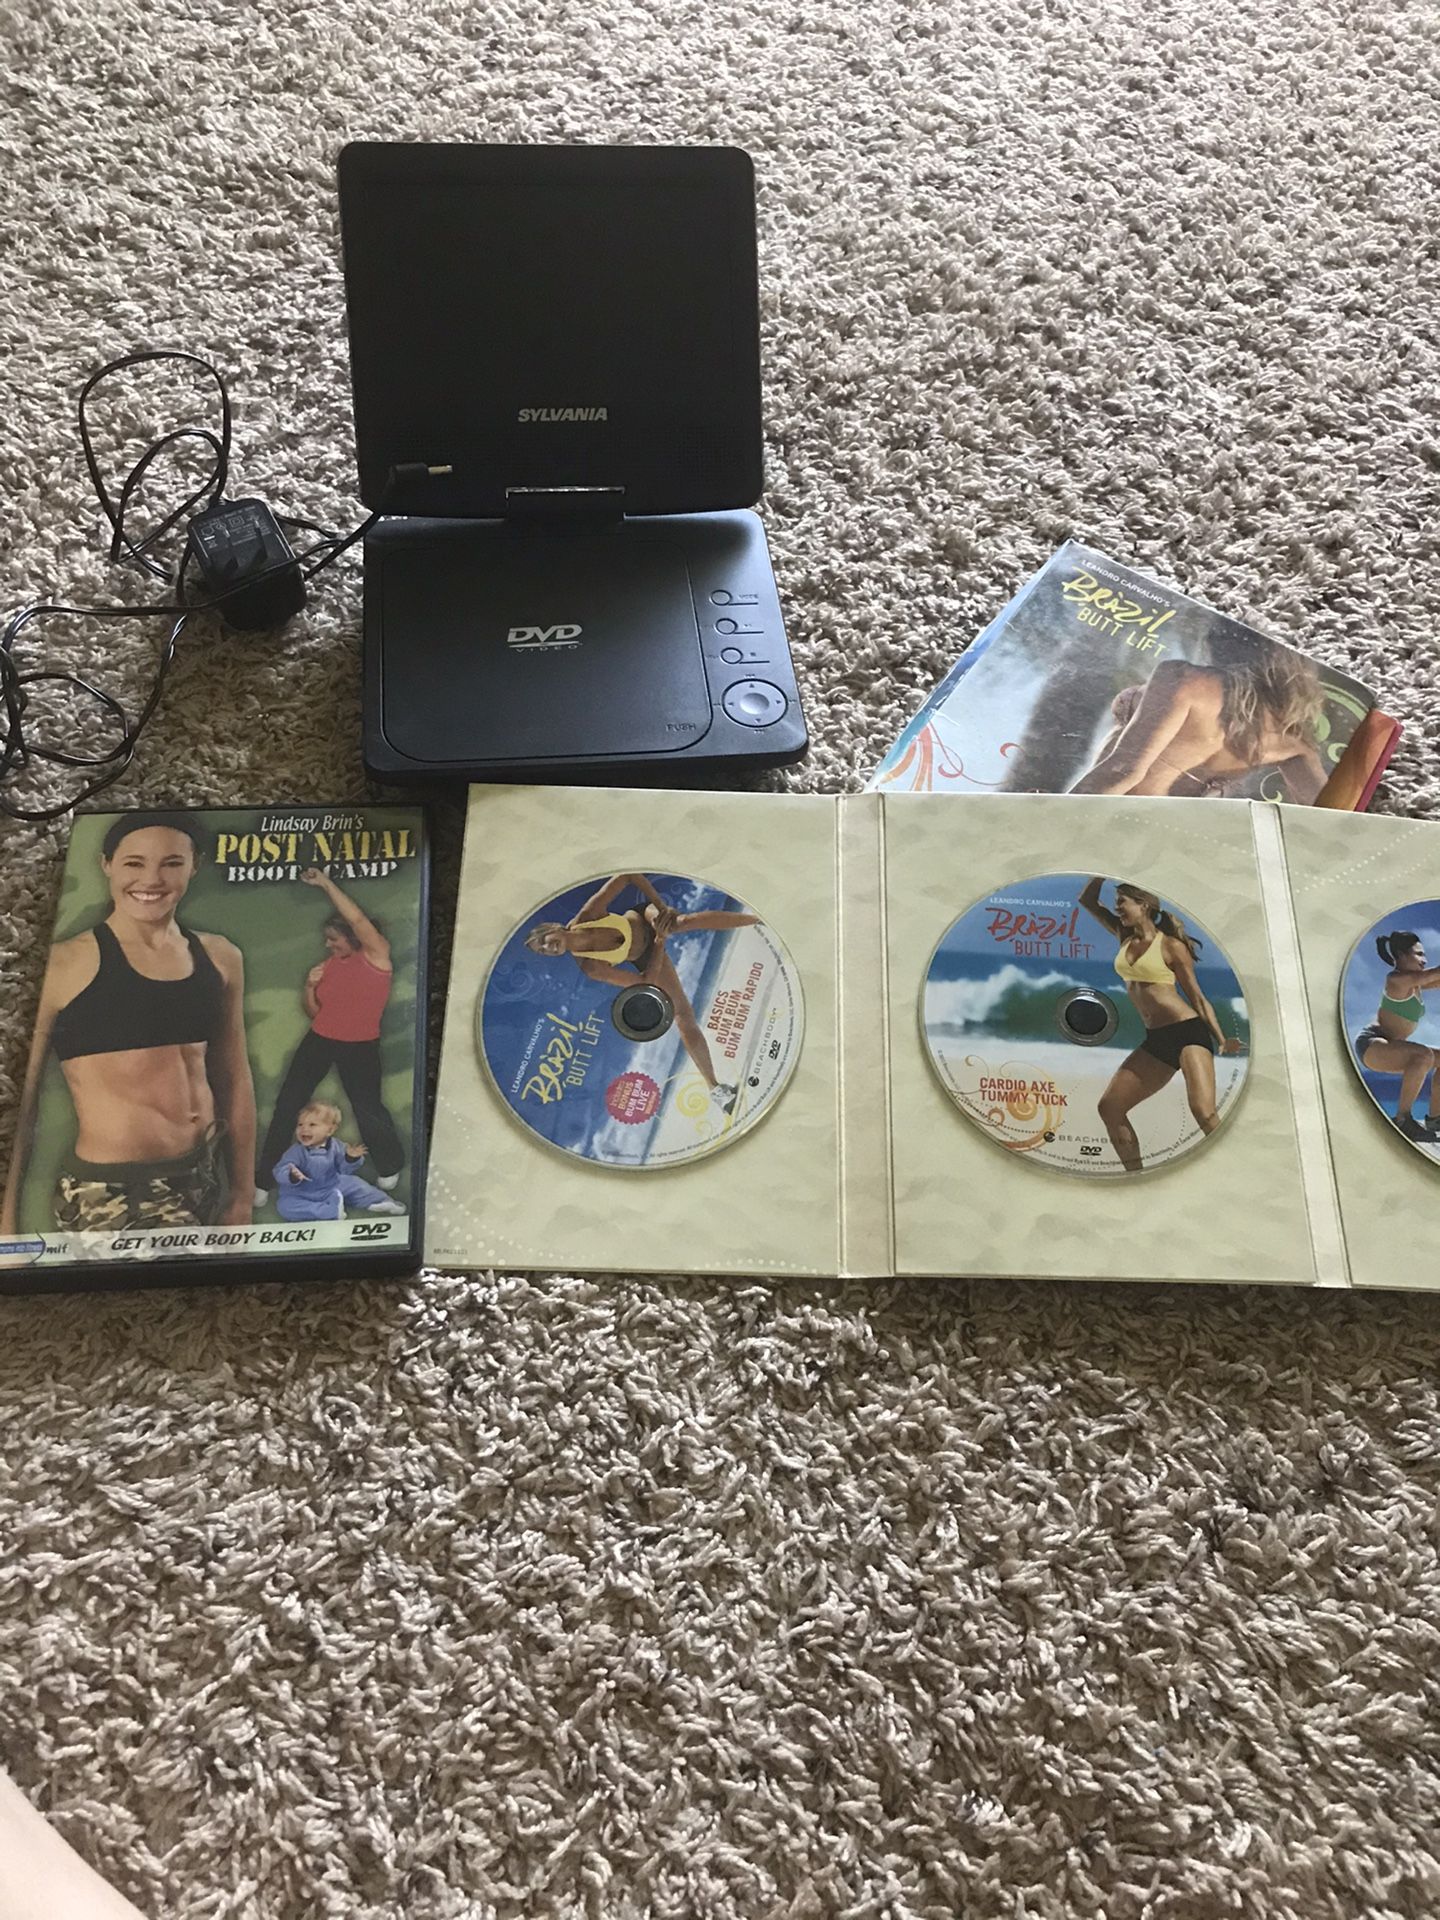 Portable dvd player used w workout dvd sets